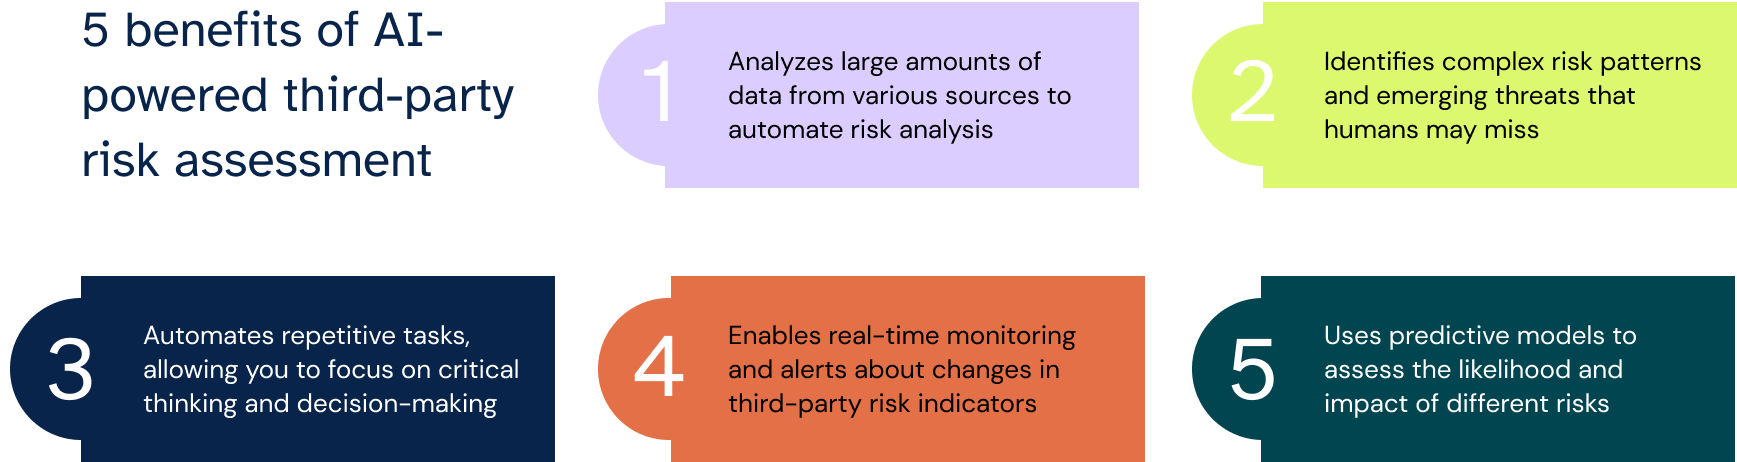 5 benefits of AI-powered third-party risk assessment